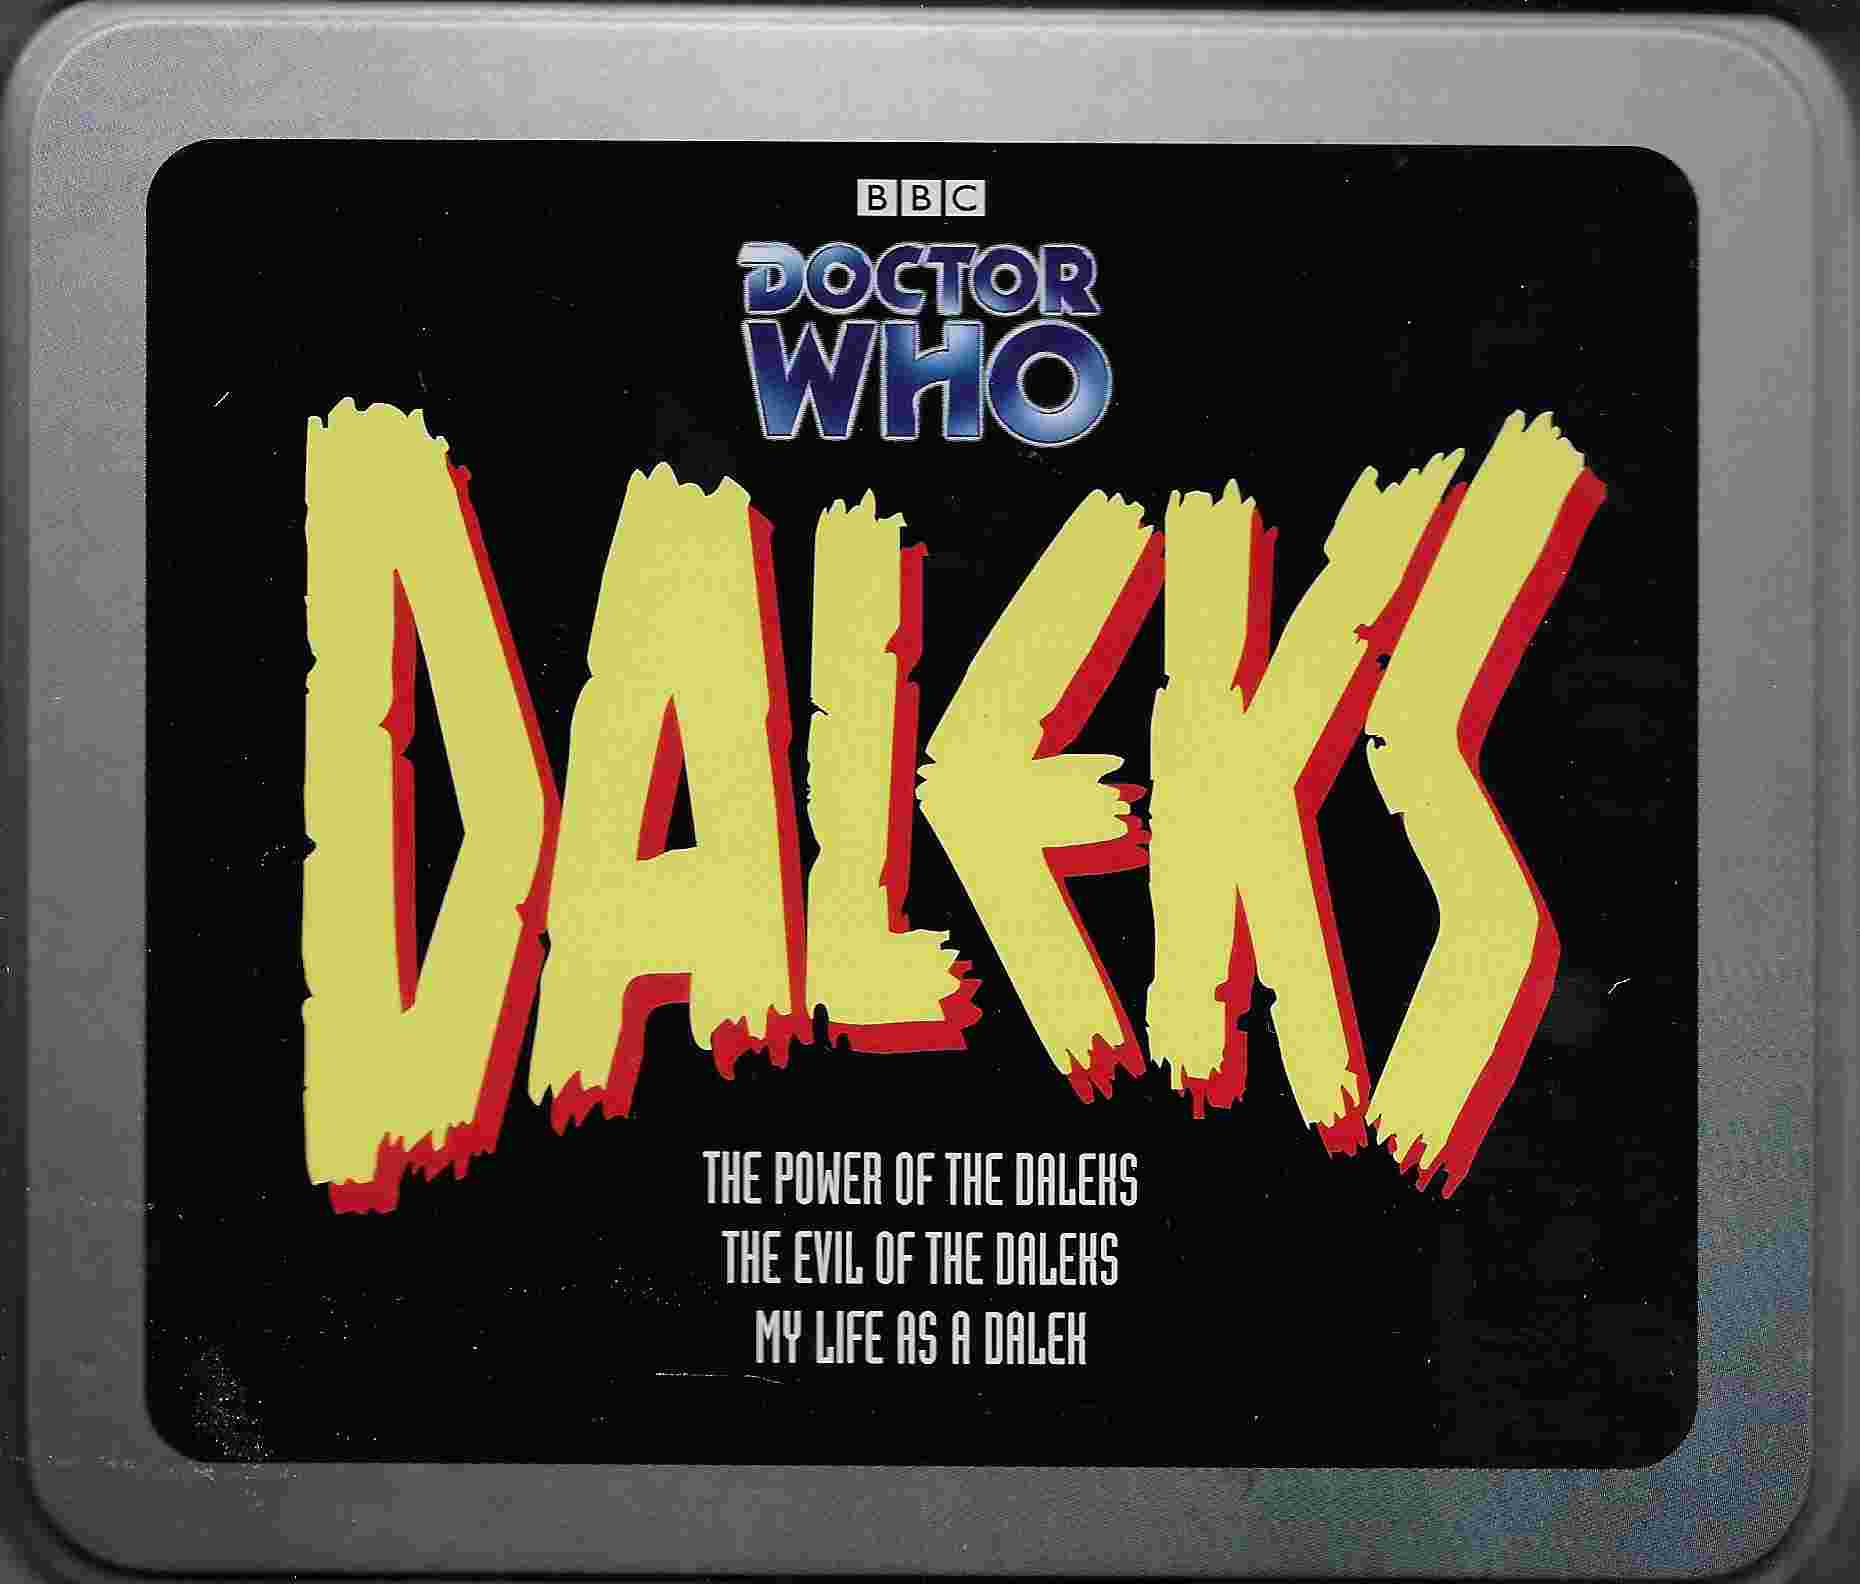 Picture of ISBN 0-563-49476-X Doctor Who - Daleks by artist David Whitaker / Mark Gatiss from the BBC records and Tapes library